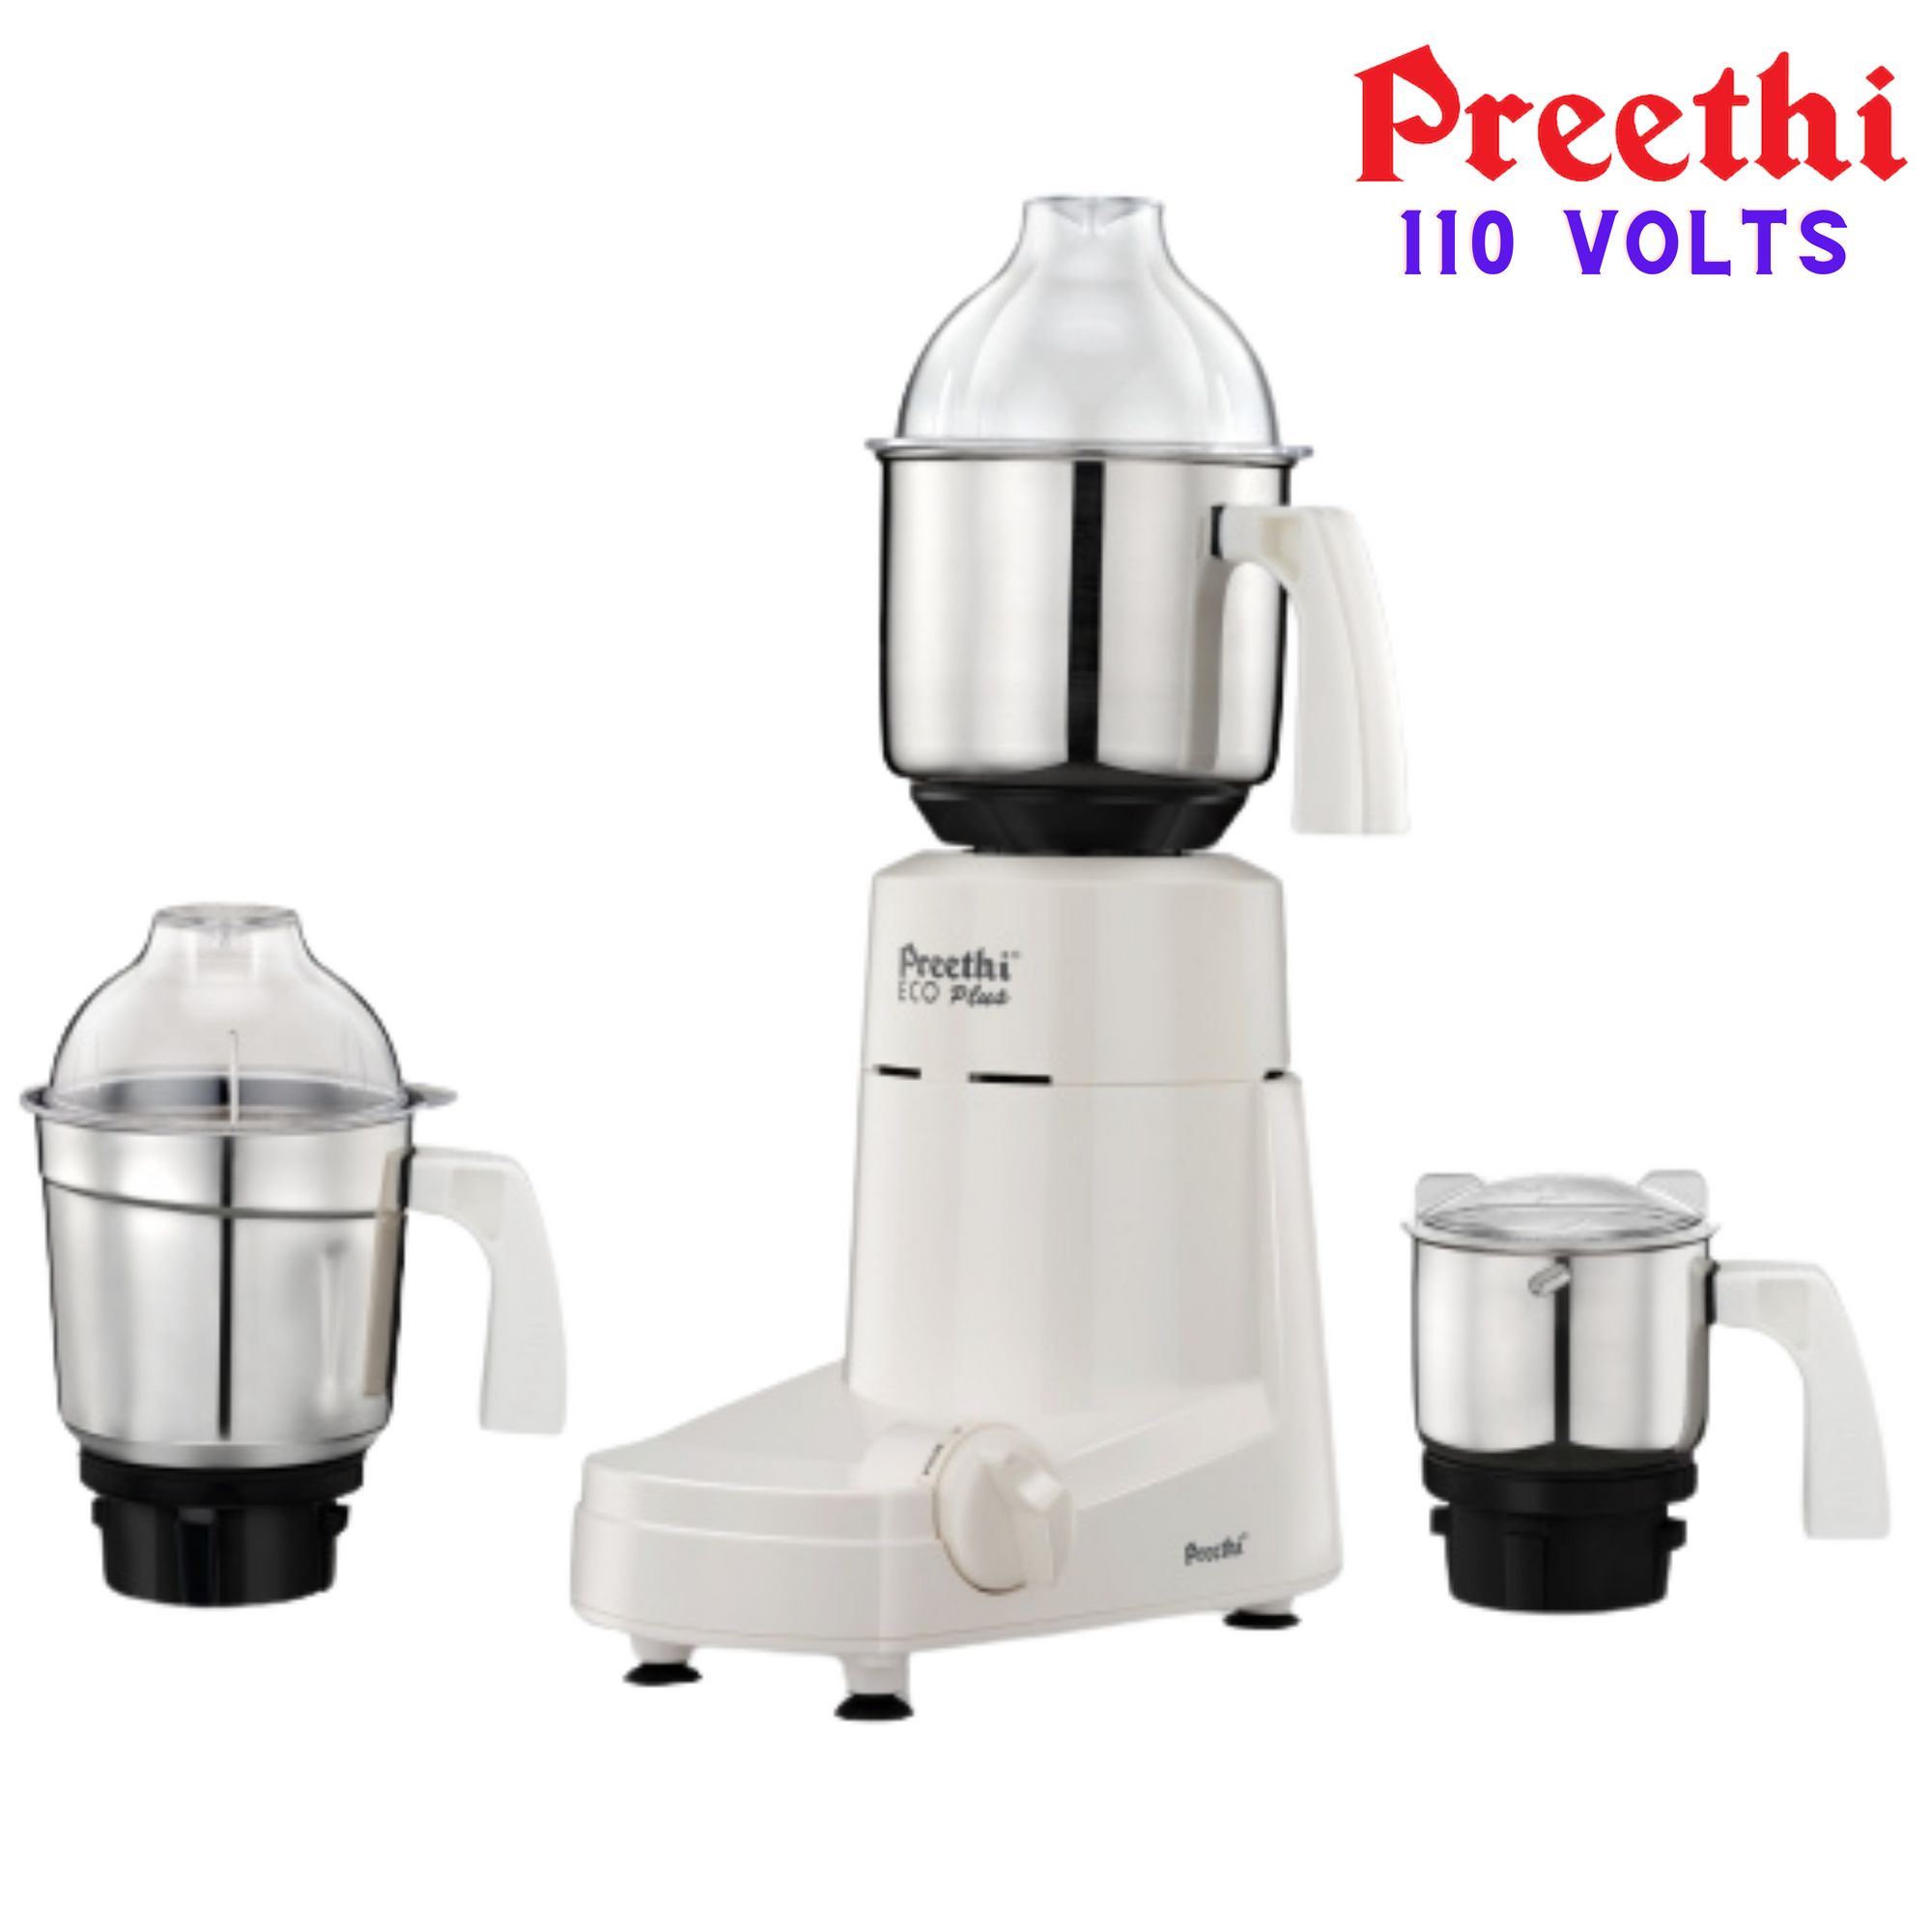 Preethi Eco Plus 110 Volts Mixer Grinder (For Use In Usa & Canada Only),White